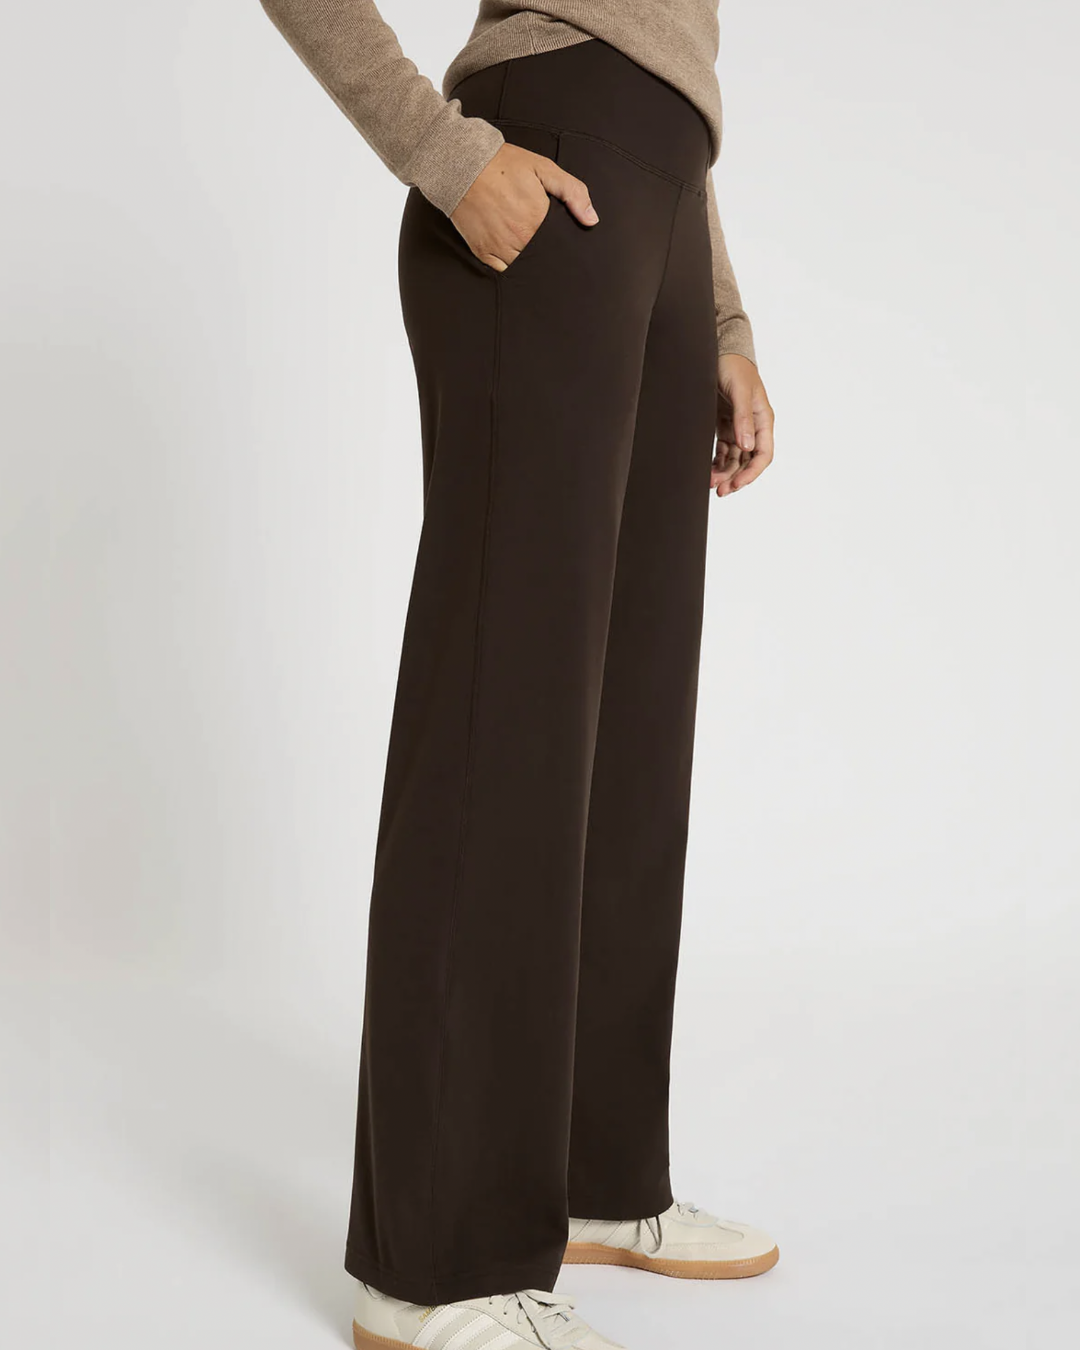 In Motion Wide Leg Pant - Espresso Activewear by Nimble - Prae Wellness